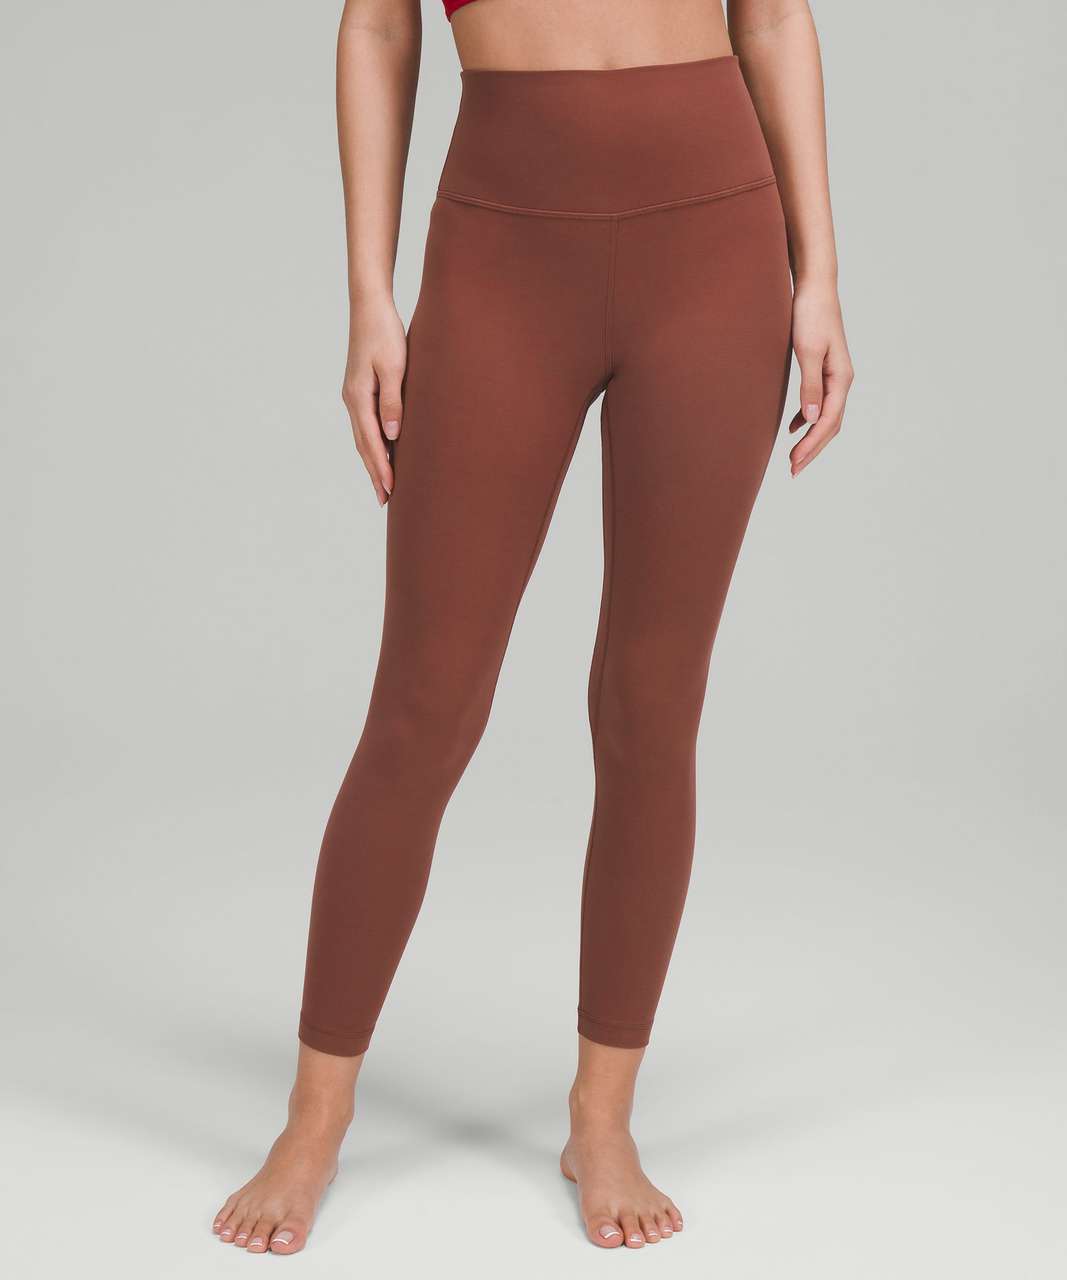 Lululemon Lunar New Year Align High-Rise Pant 25" - Smoky Red